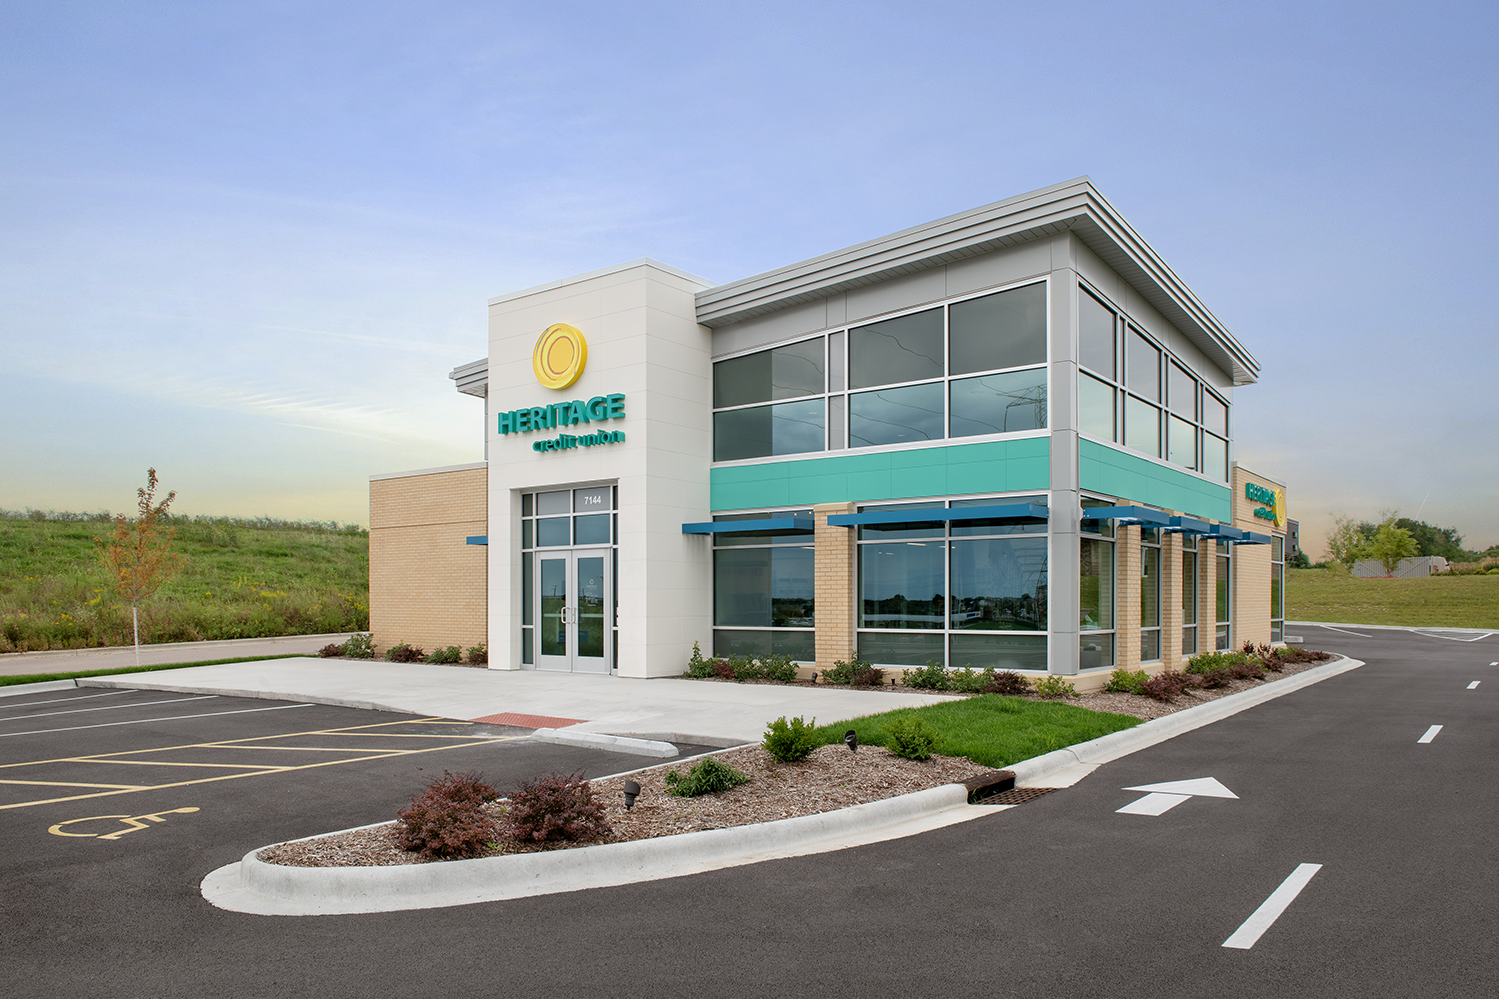 New credit union branch in Illinois